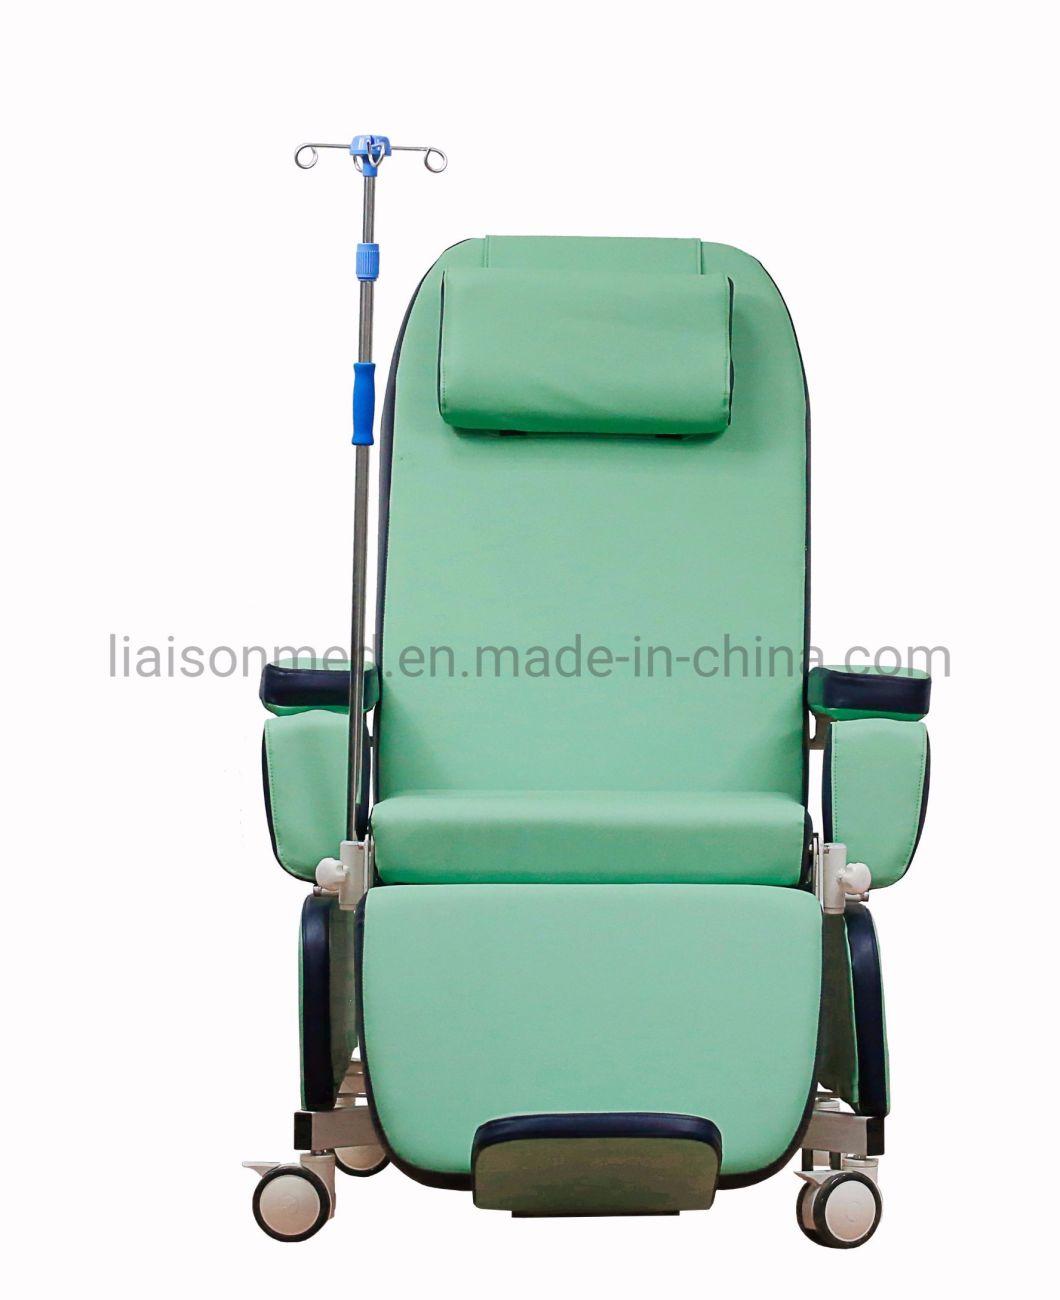 Mn-Bdc002 Medical Equipment Multi-Function Adjustable Electric Patient Dialysis Chair